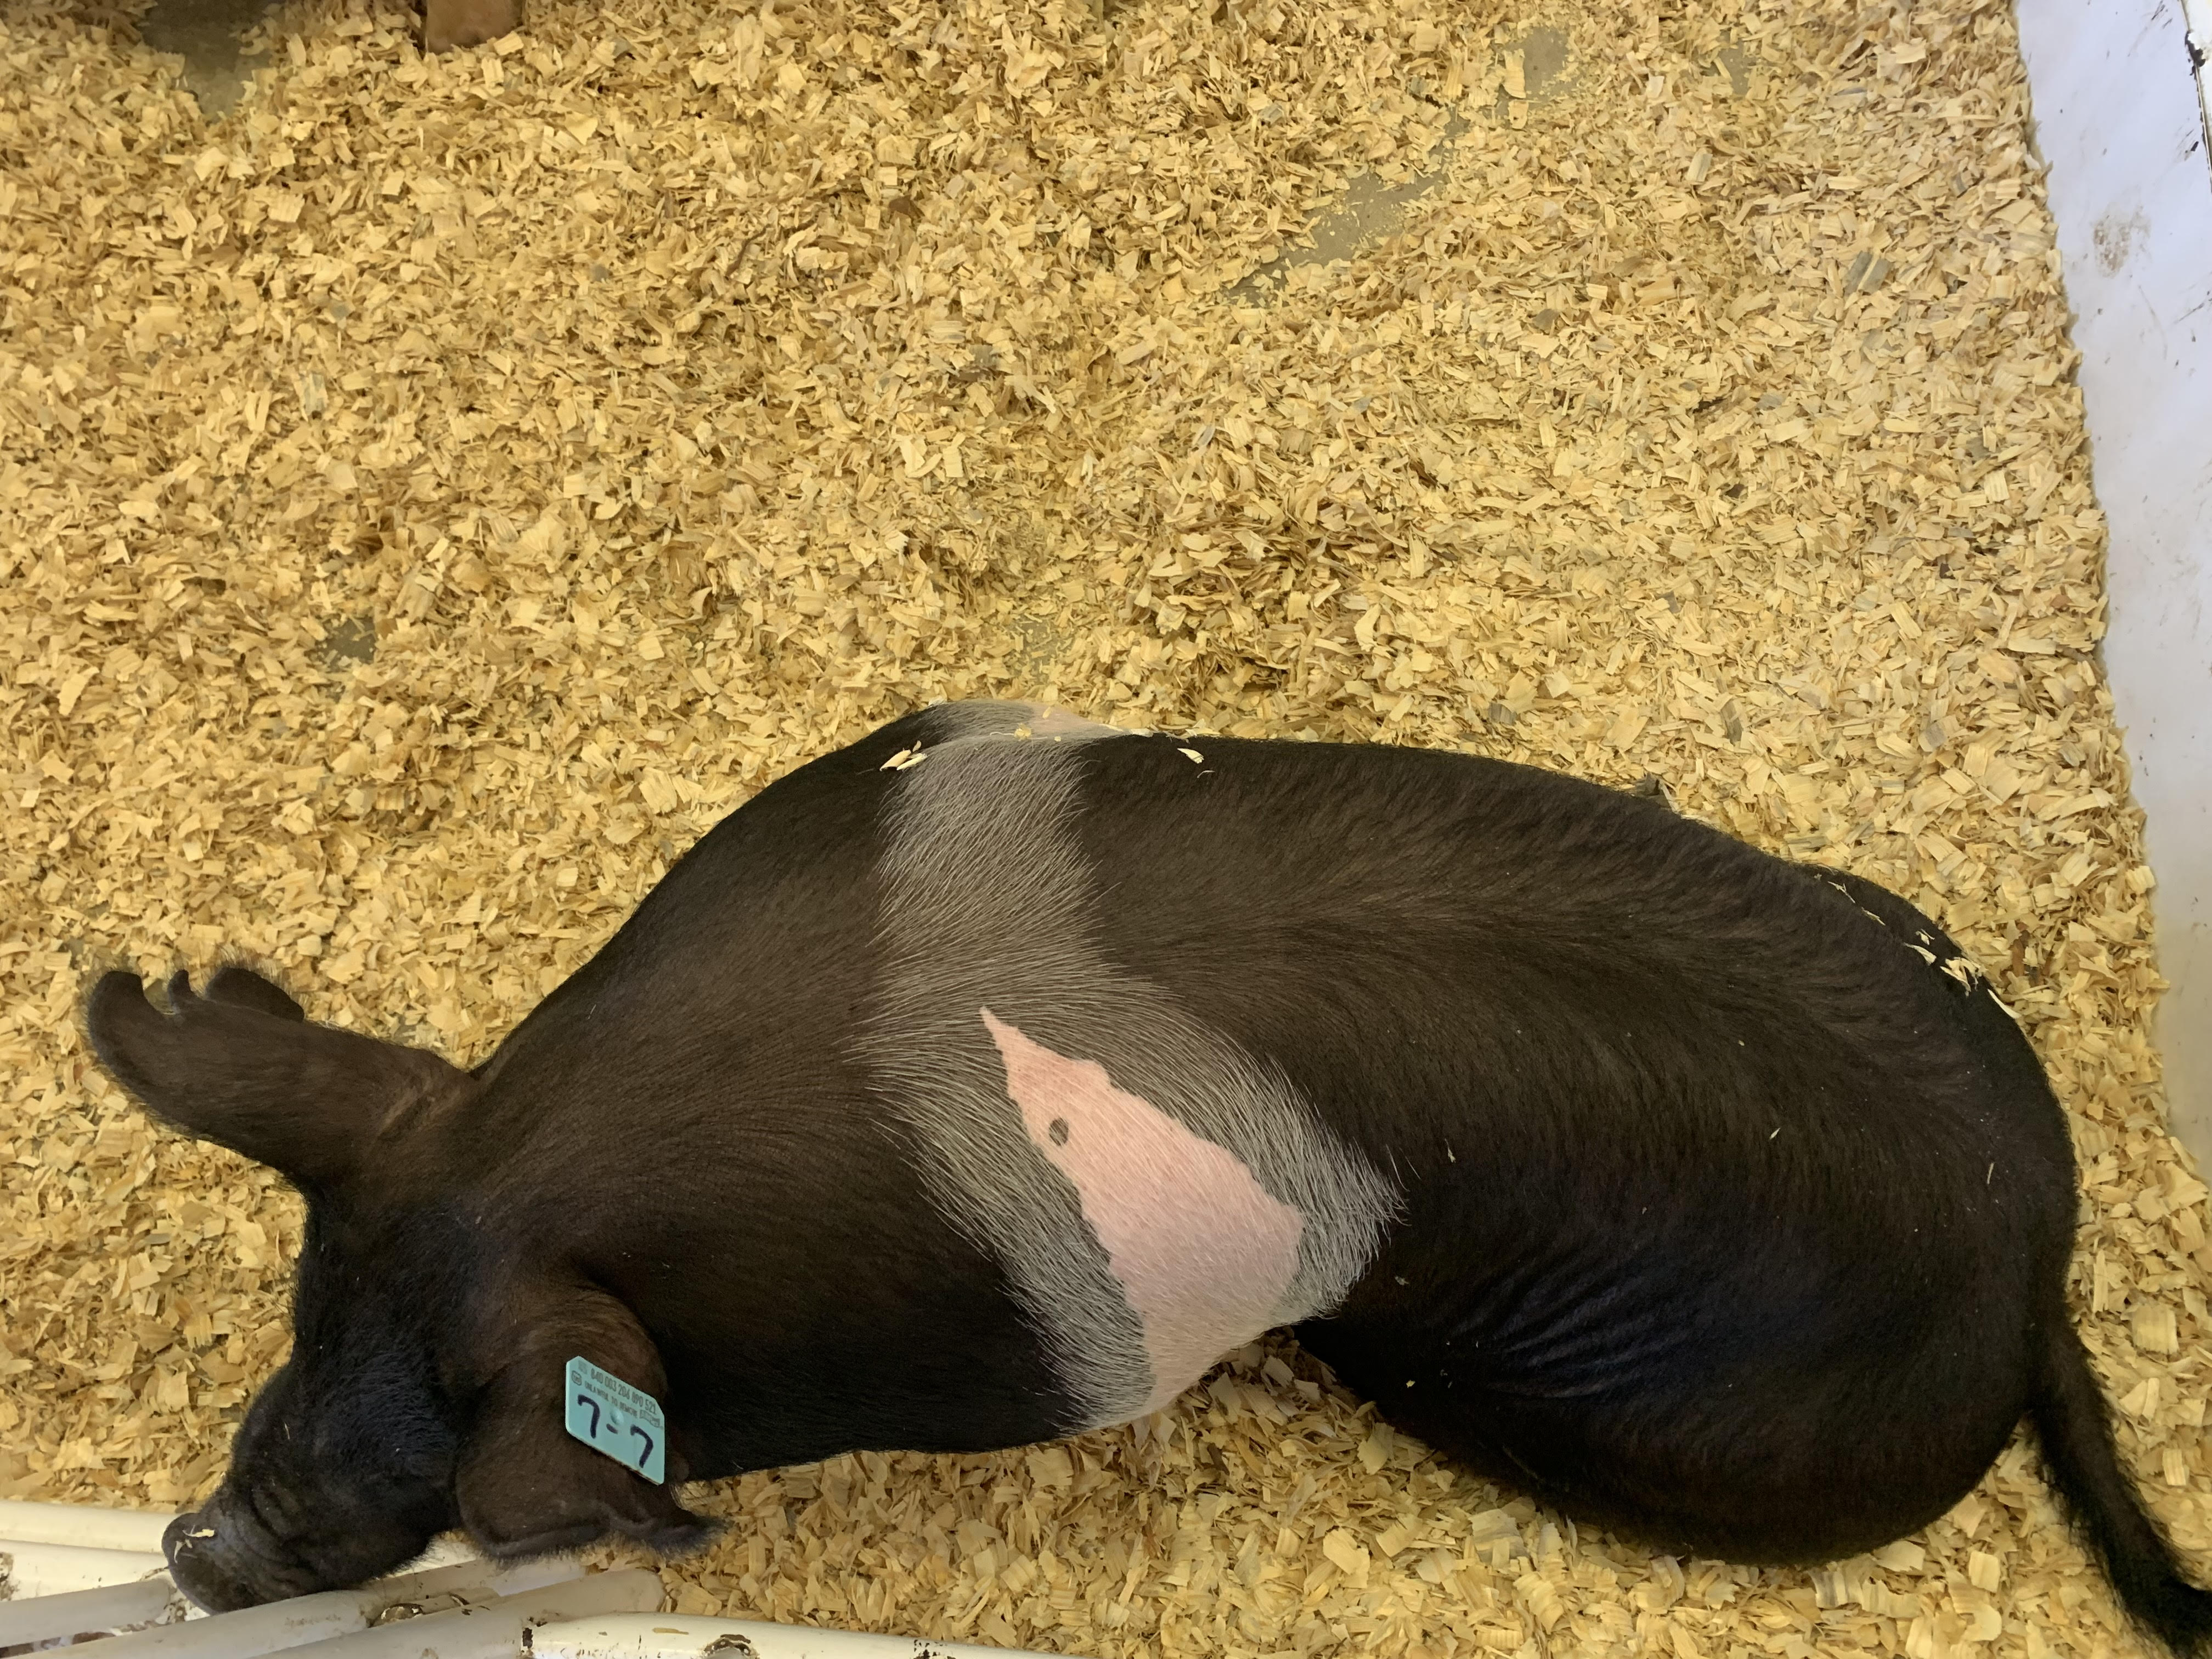 Morning Ag News, October 13, 2021: African Swine Fever vaccine advancements